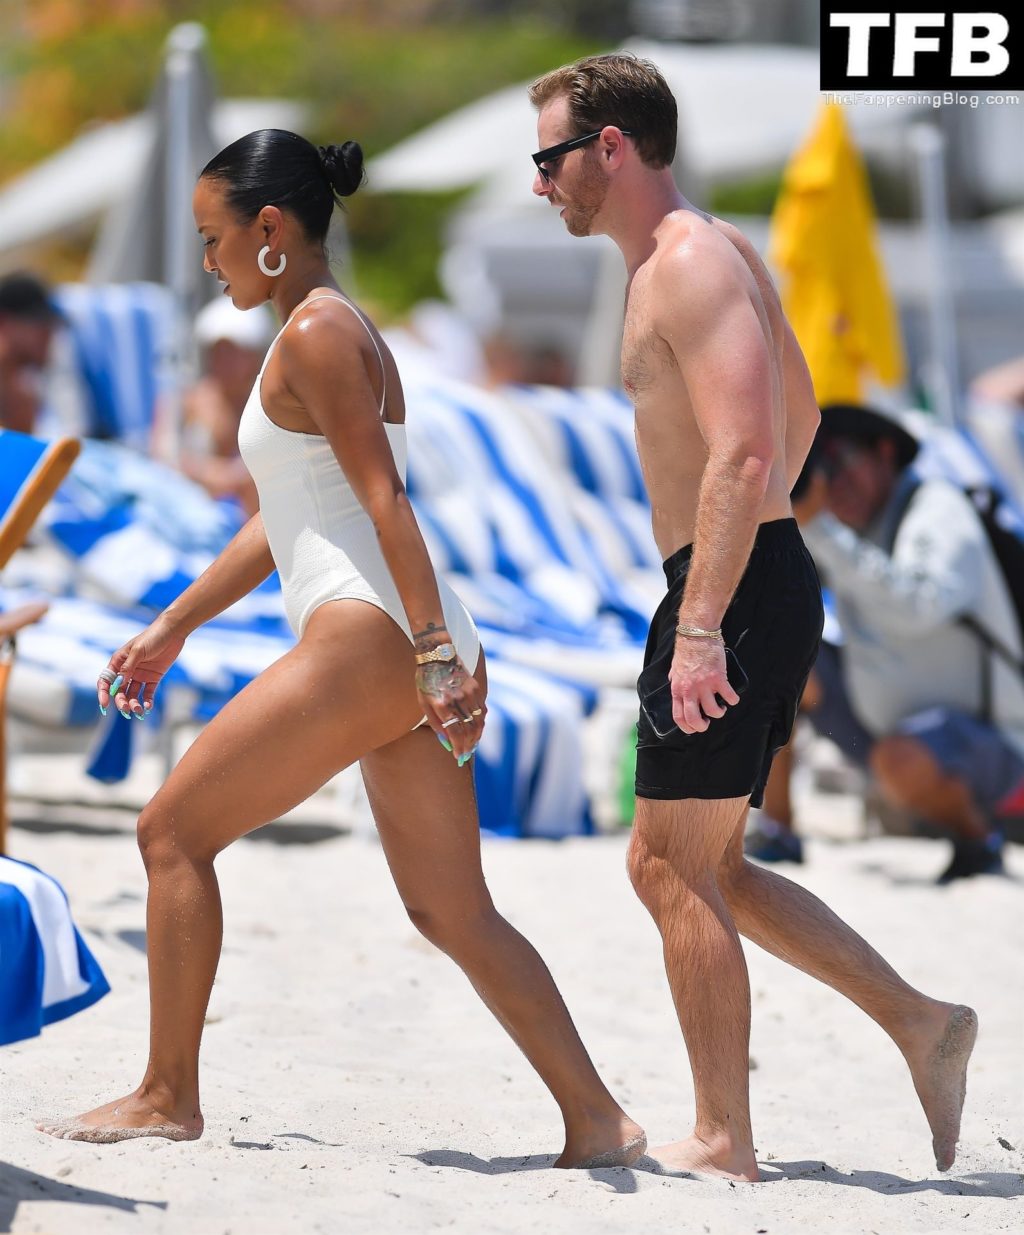 Karrueche Tran Sexy The Fappening Blog 25 1024x1235 - Karrueche Tran Looks Incredible in a White Swimsuit on the Beach in Miami (45 Photos)